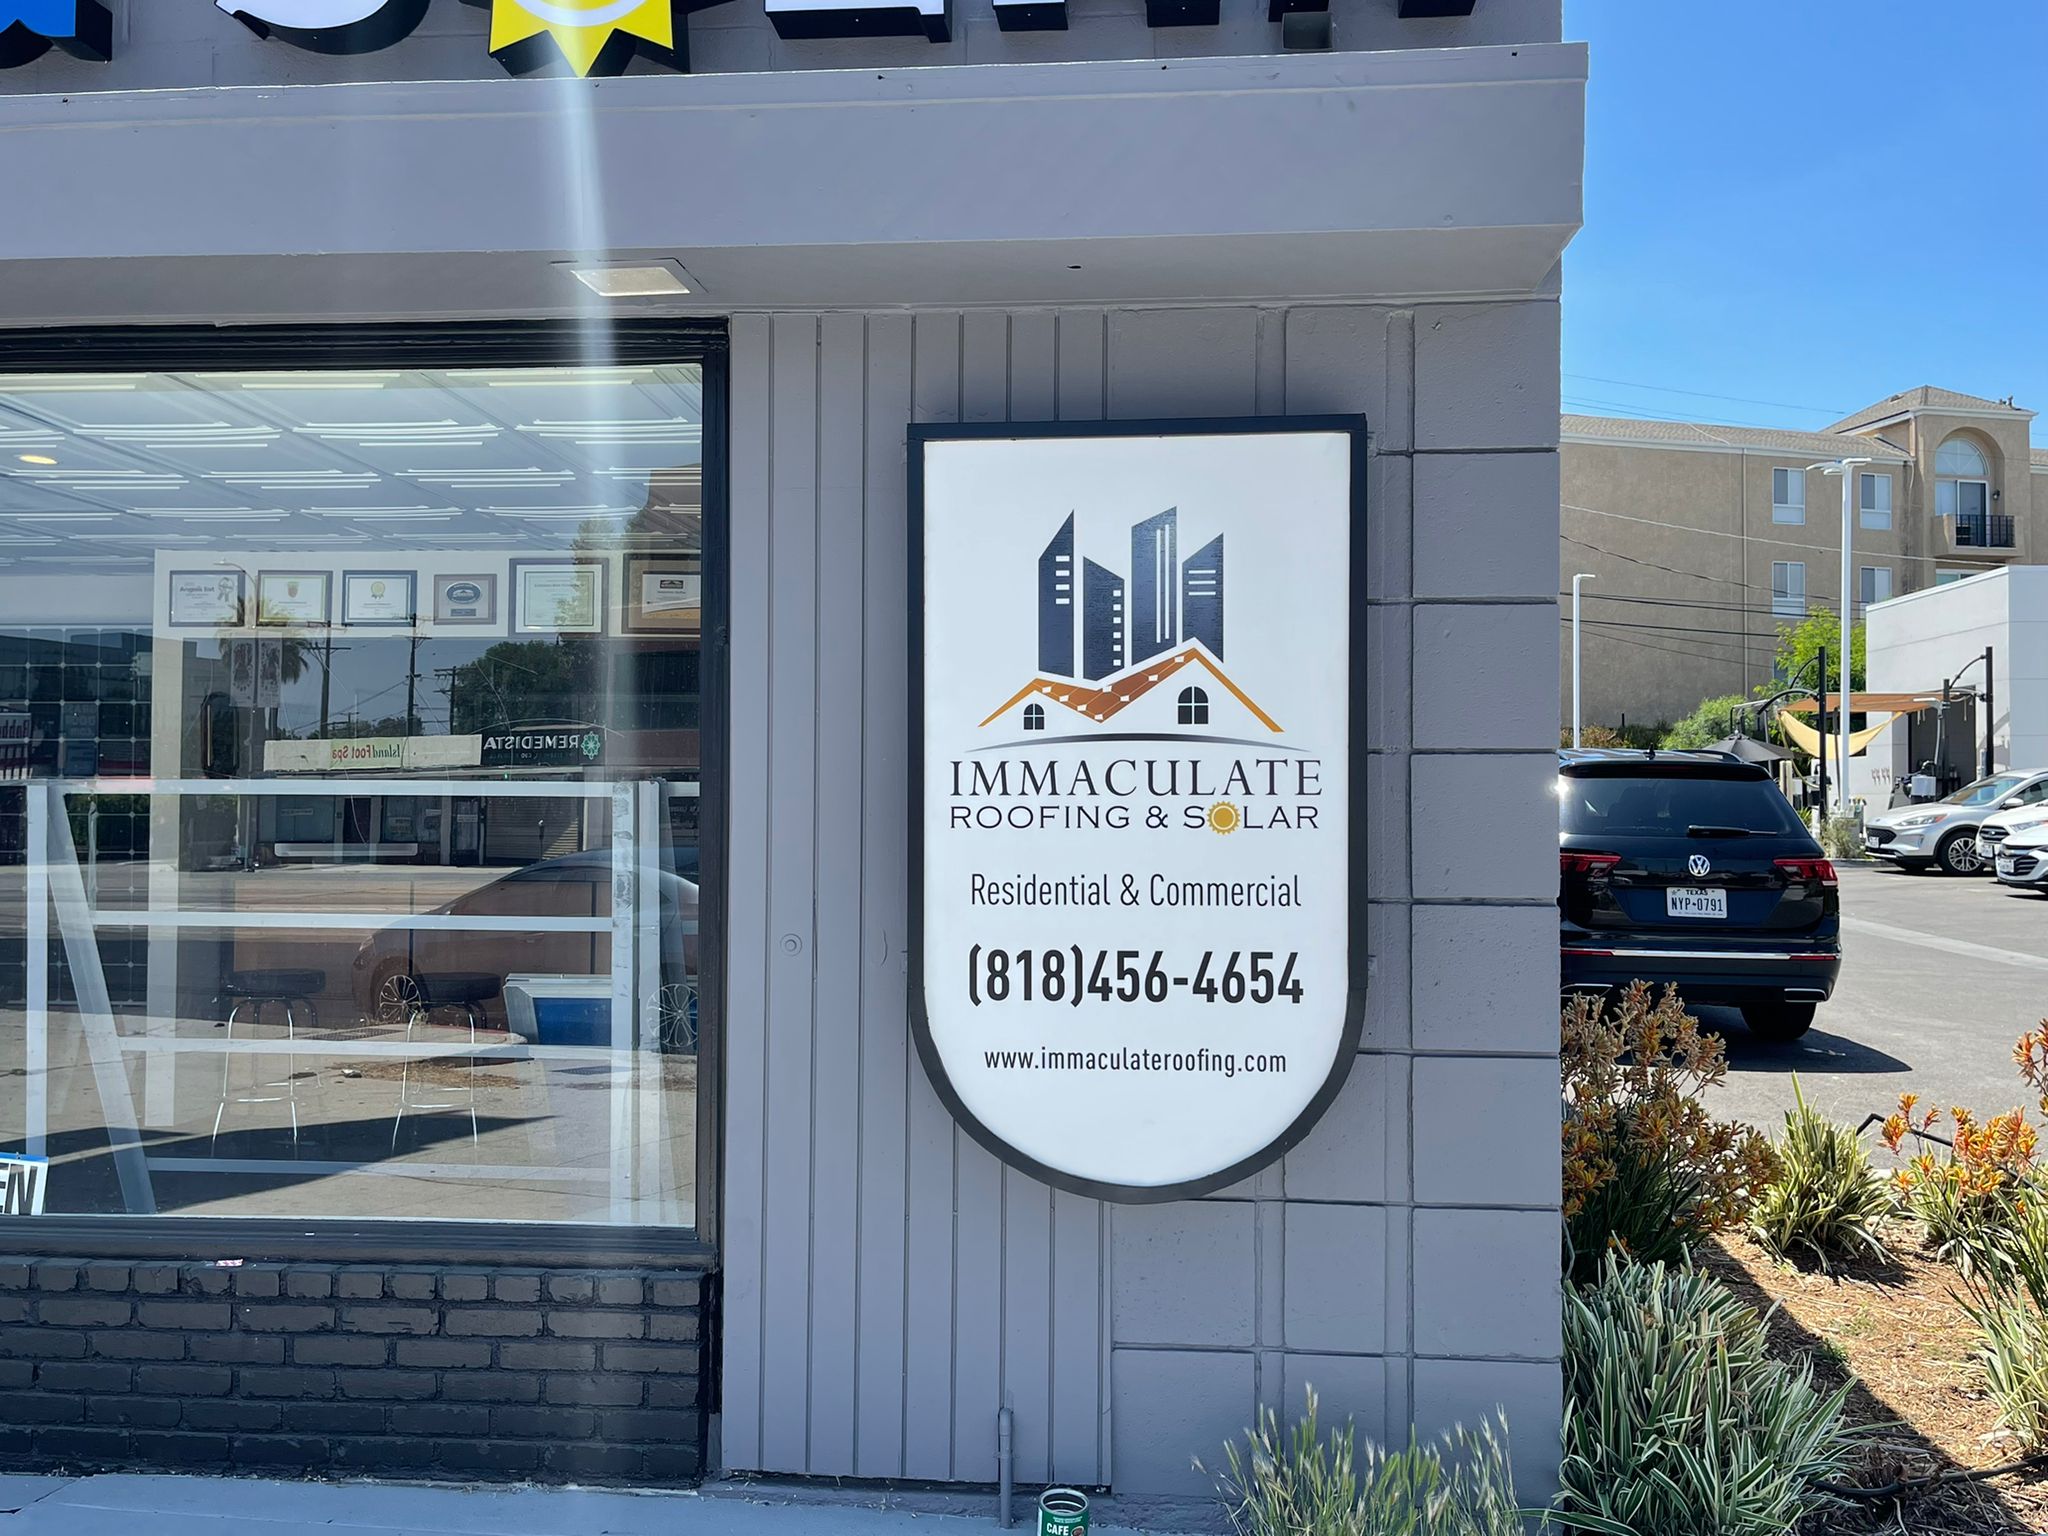 More from the storefront sign package for Immaculate Roofing & Solar Co. in Woodland Hills. This is the storefront light box sign that adorns their frontage.